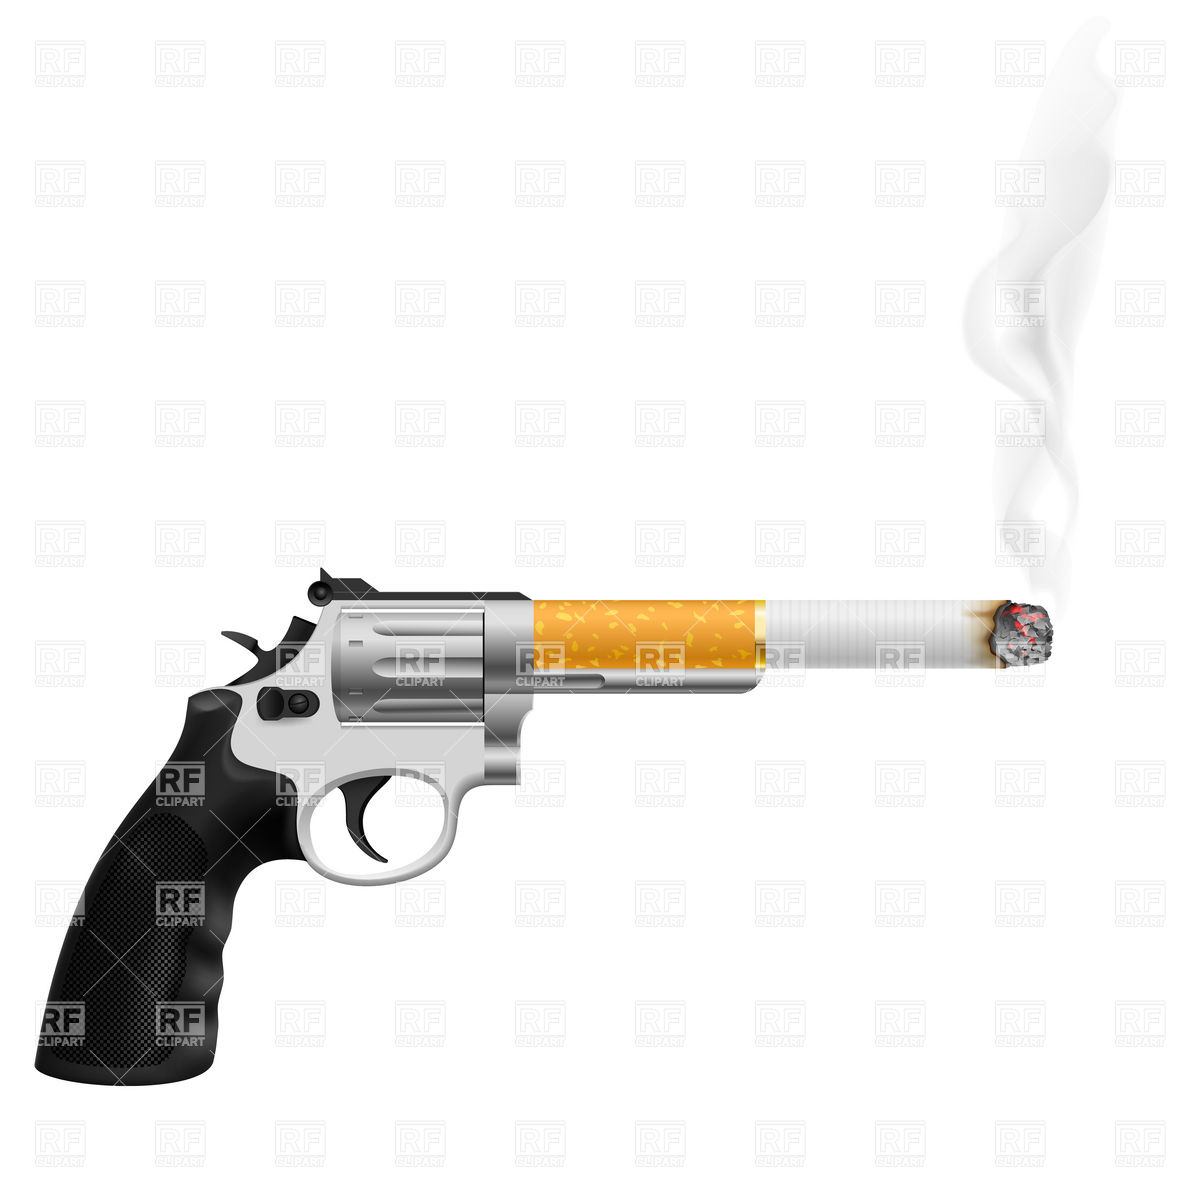 Revolver With Cigarette Instead Of Barrel 6473 Download Royalty Free